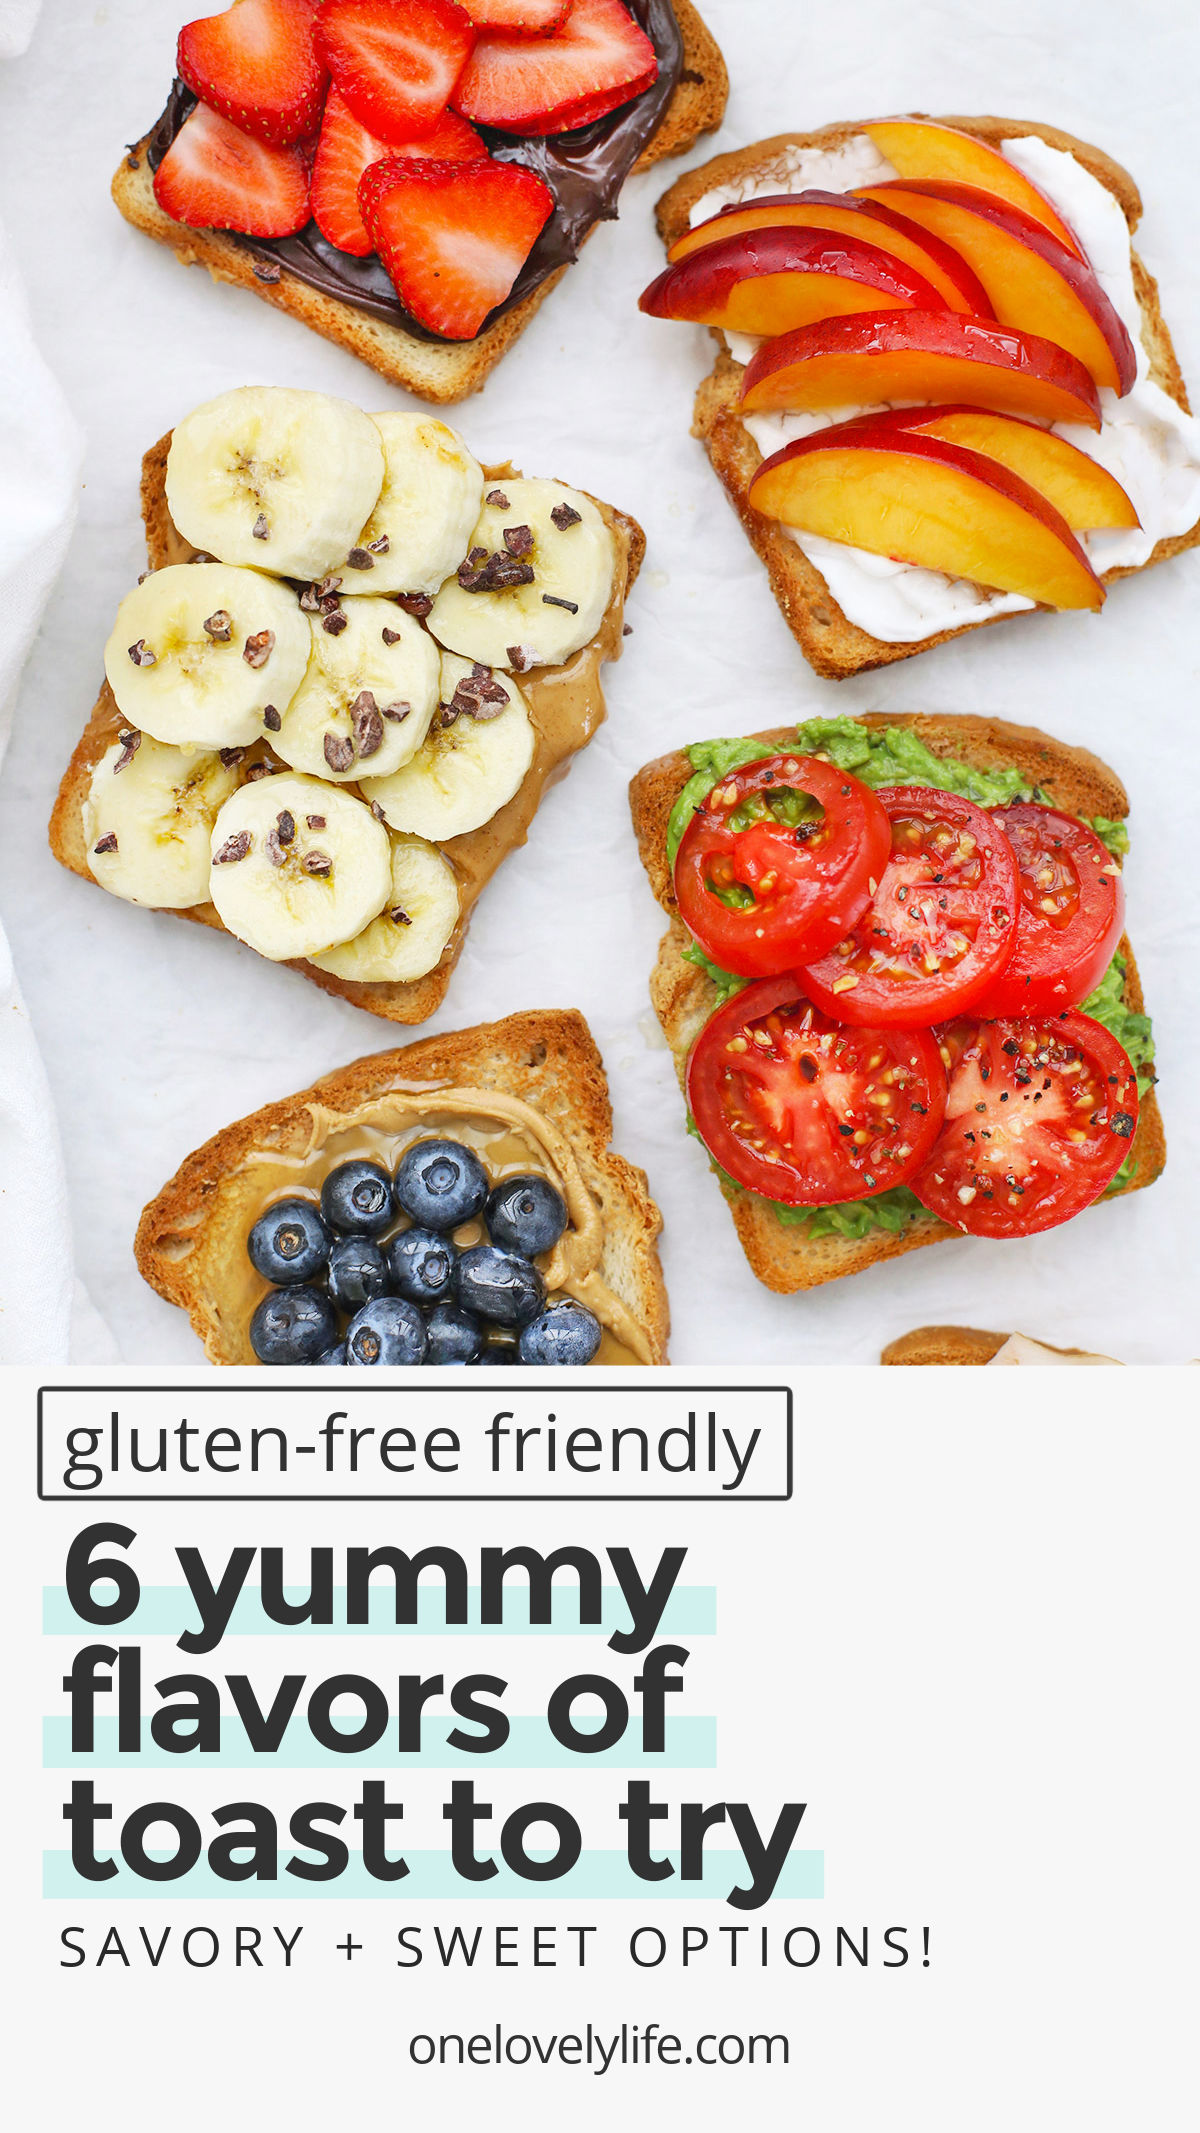 Yummy Toast Flavors to Try - These tasty toast ideas are the perfect way to get creative at breakfast, lunch, or snack. Choose from our lists of topping ideas or try one of our 6 favorite combinations. (Gluten-Free + Vegan Options) // Gluten-Free Toast // Creative Toast Ideas // Breakfast // brunch // hummus toast // avocado toast #toast #breakfast #brunch #snack